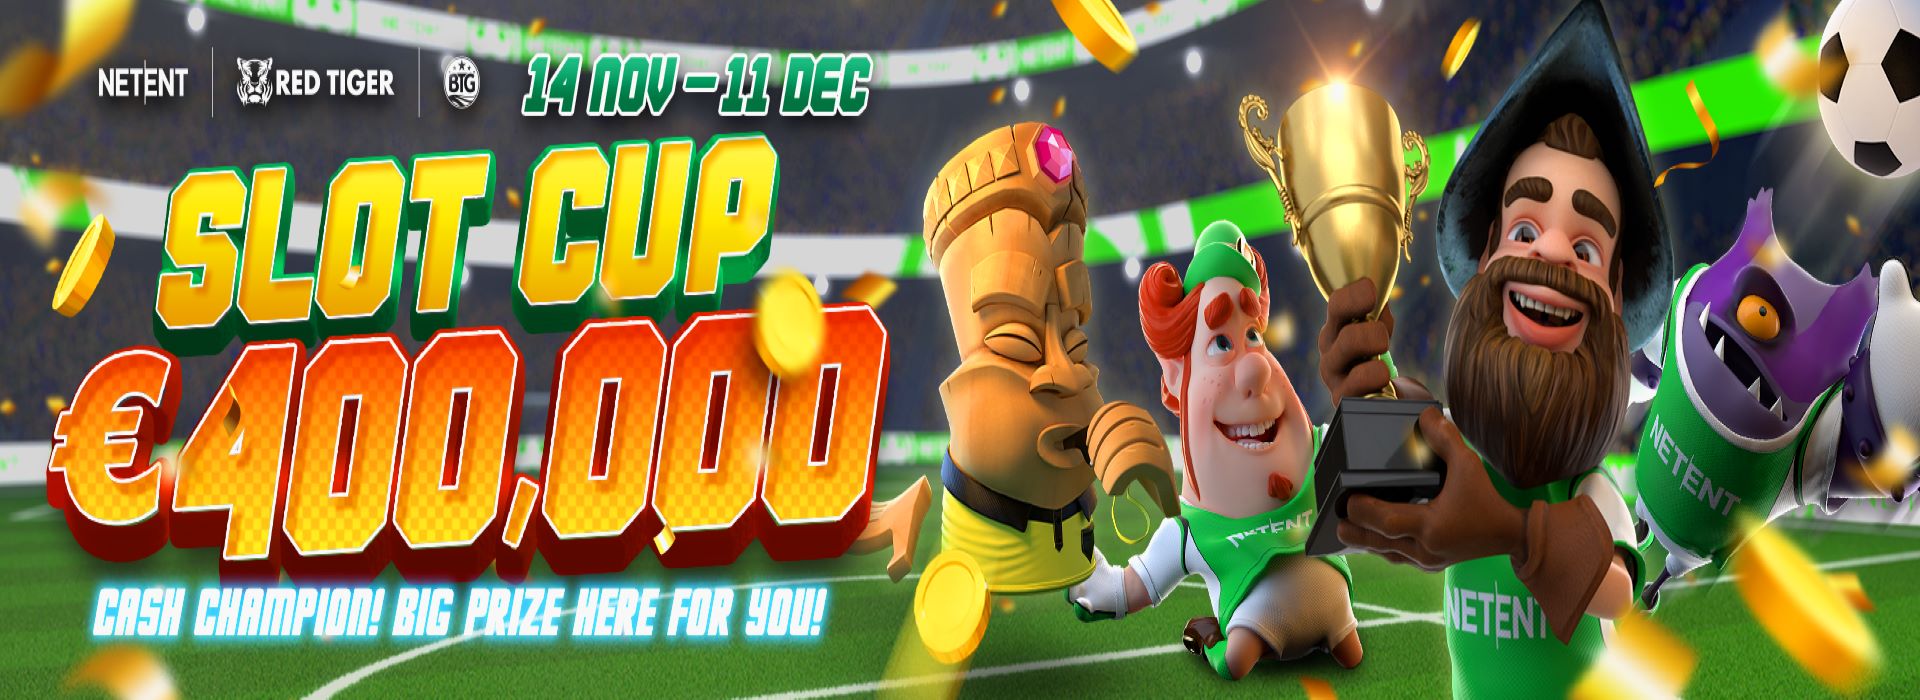 Slot Cup Total Prize up to € 400,000 !!! Cash Champion!!! Big Prize Here For You!